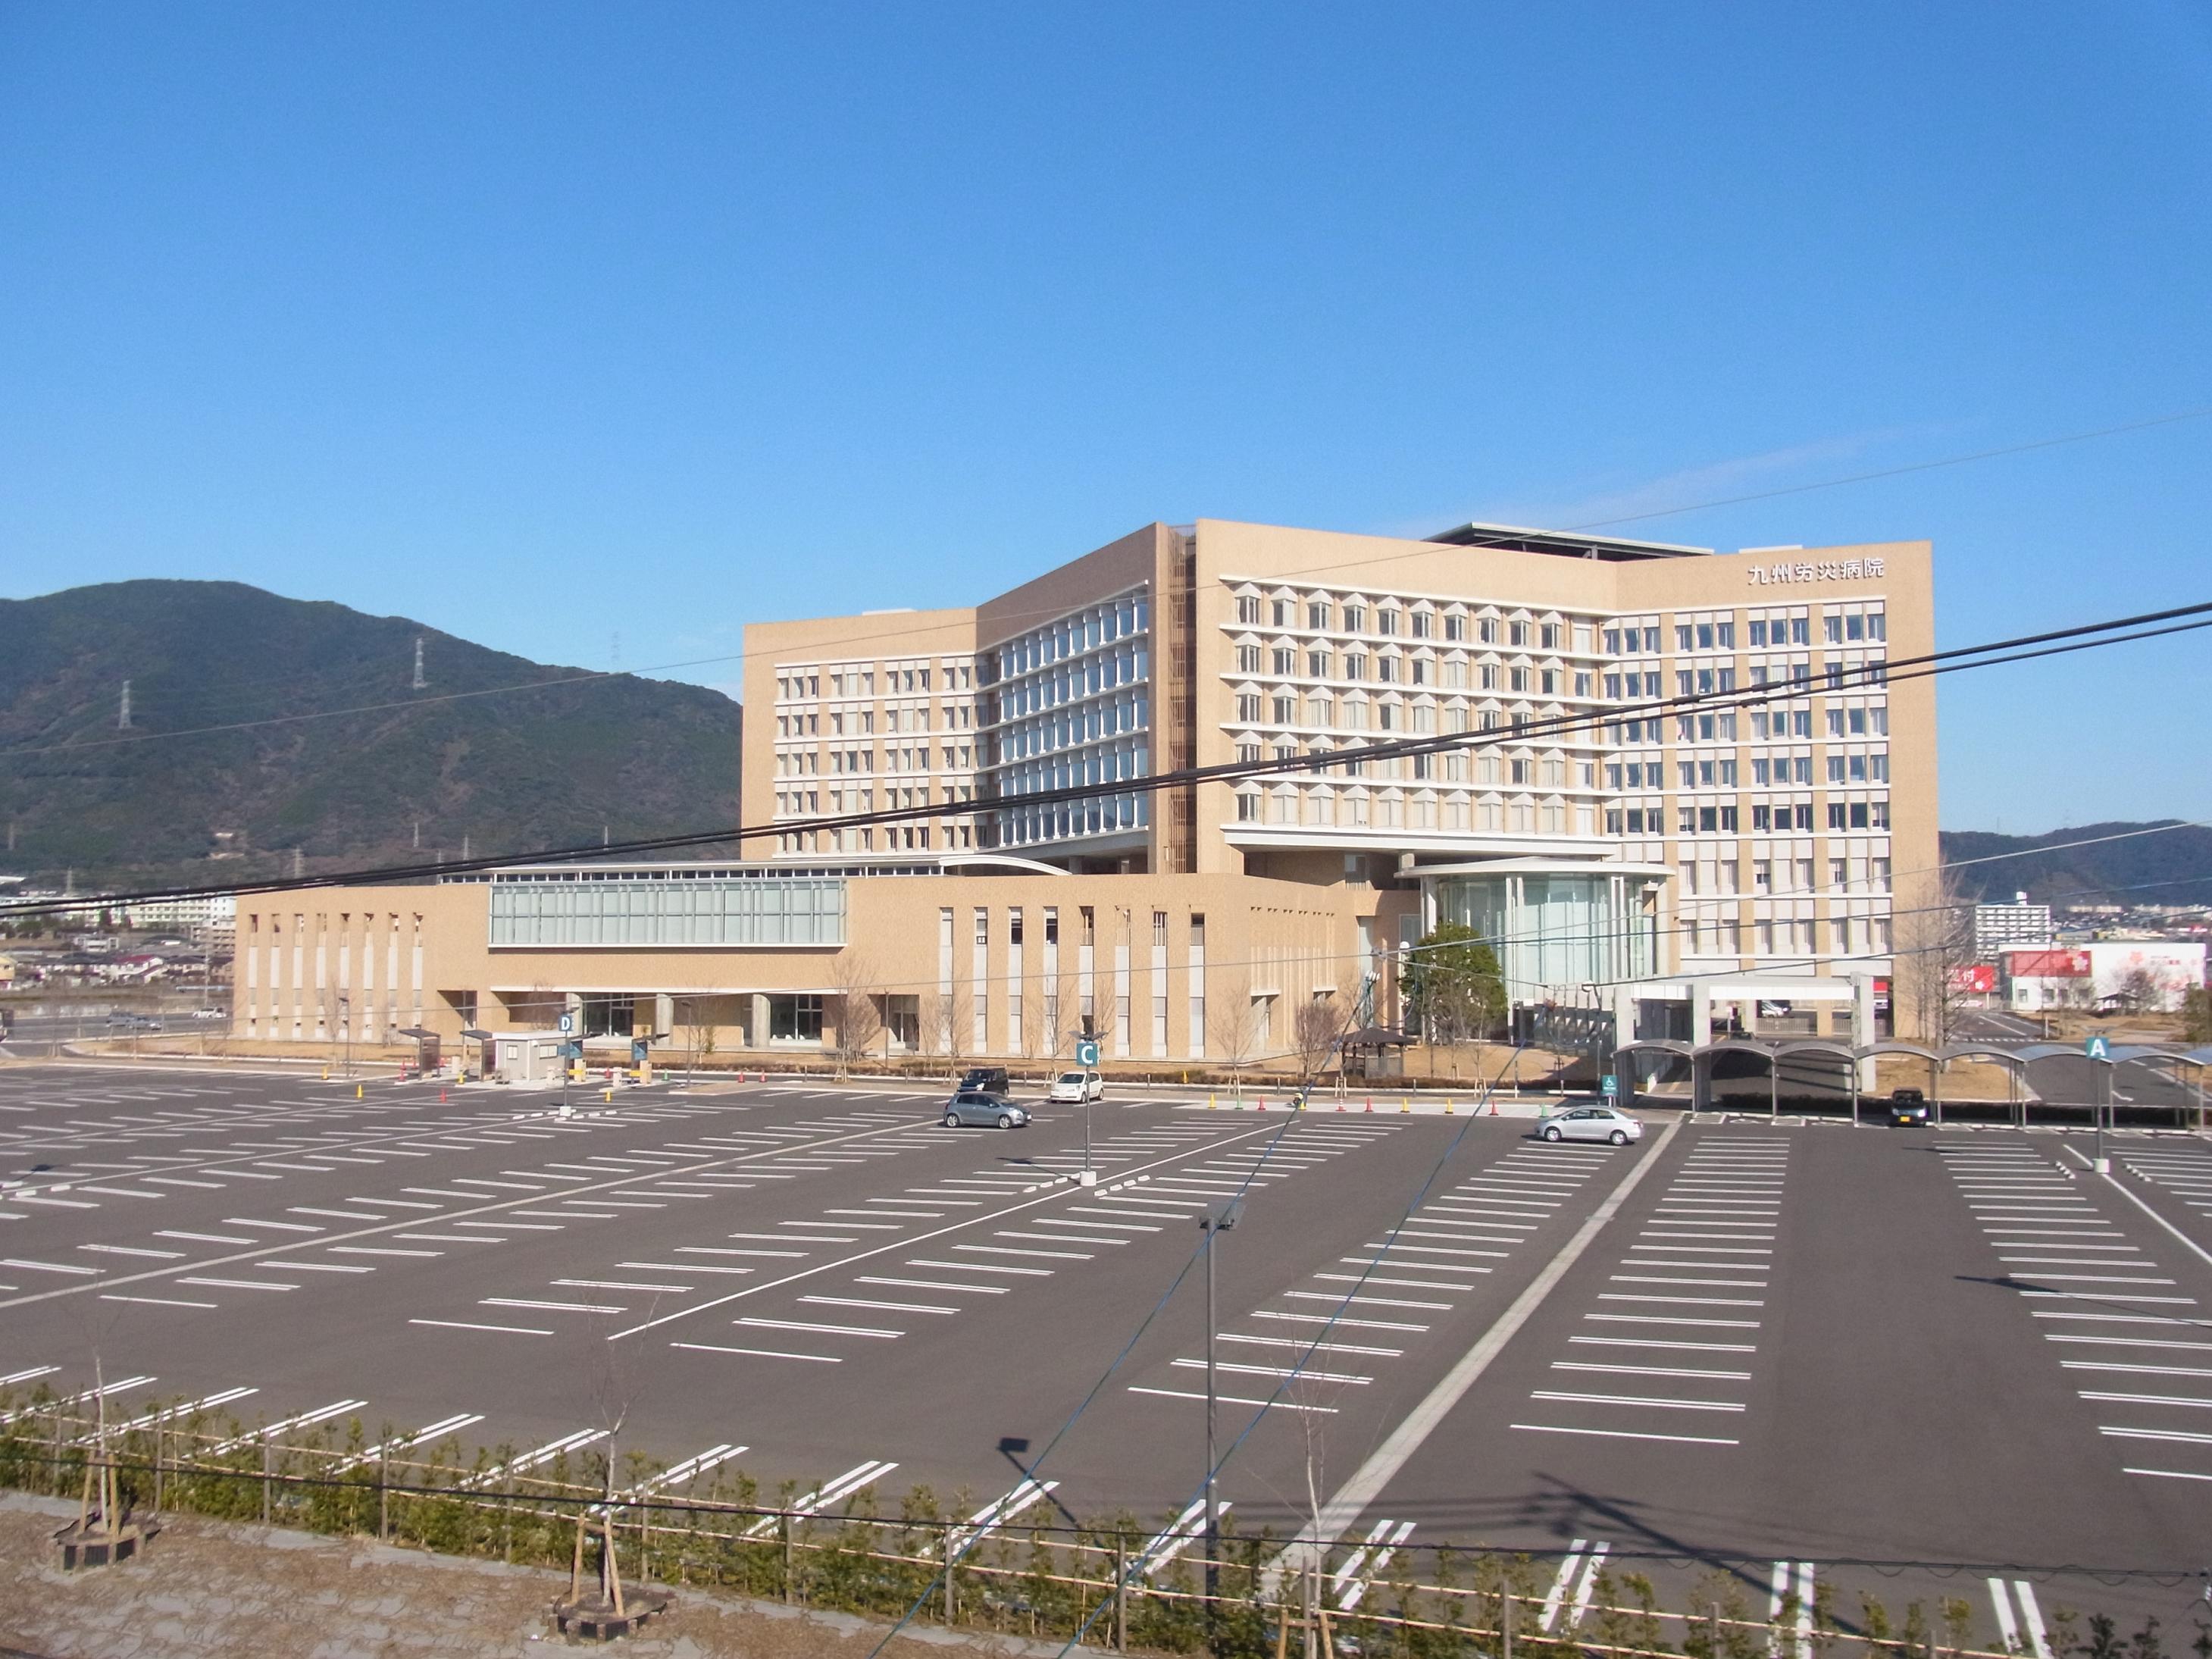 Hospital. 888m to the National Institute of Labor Health and Welfare Organization Kyushurosaibyoin (hospital)